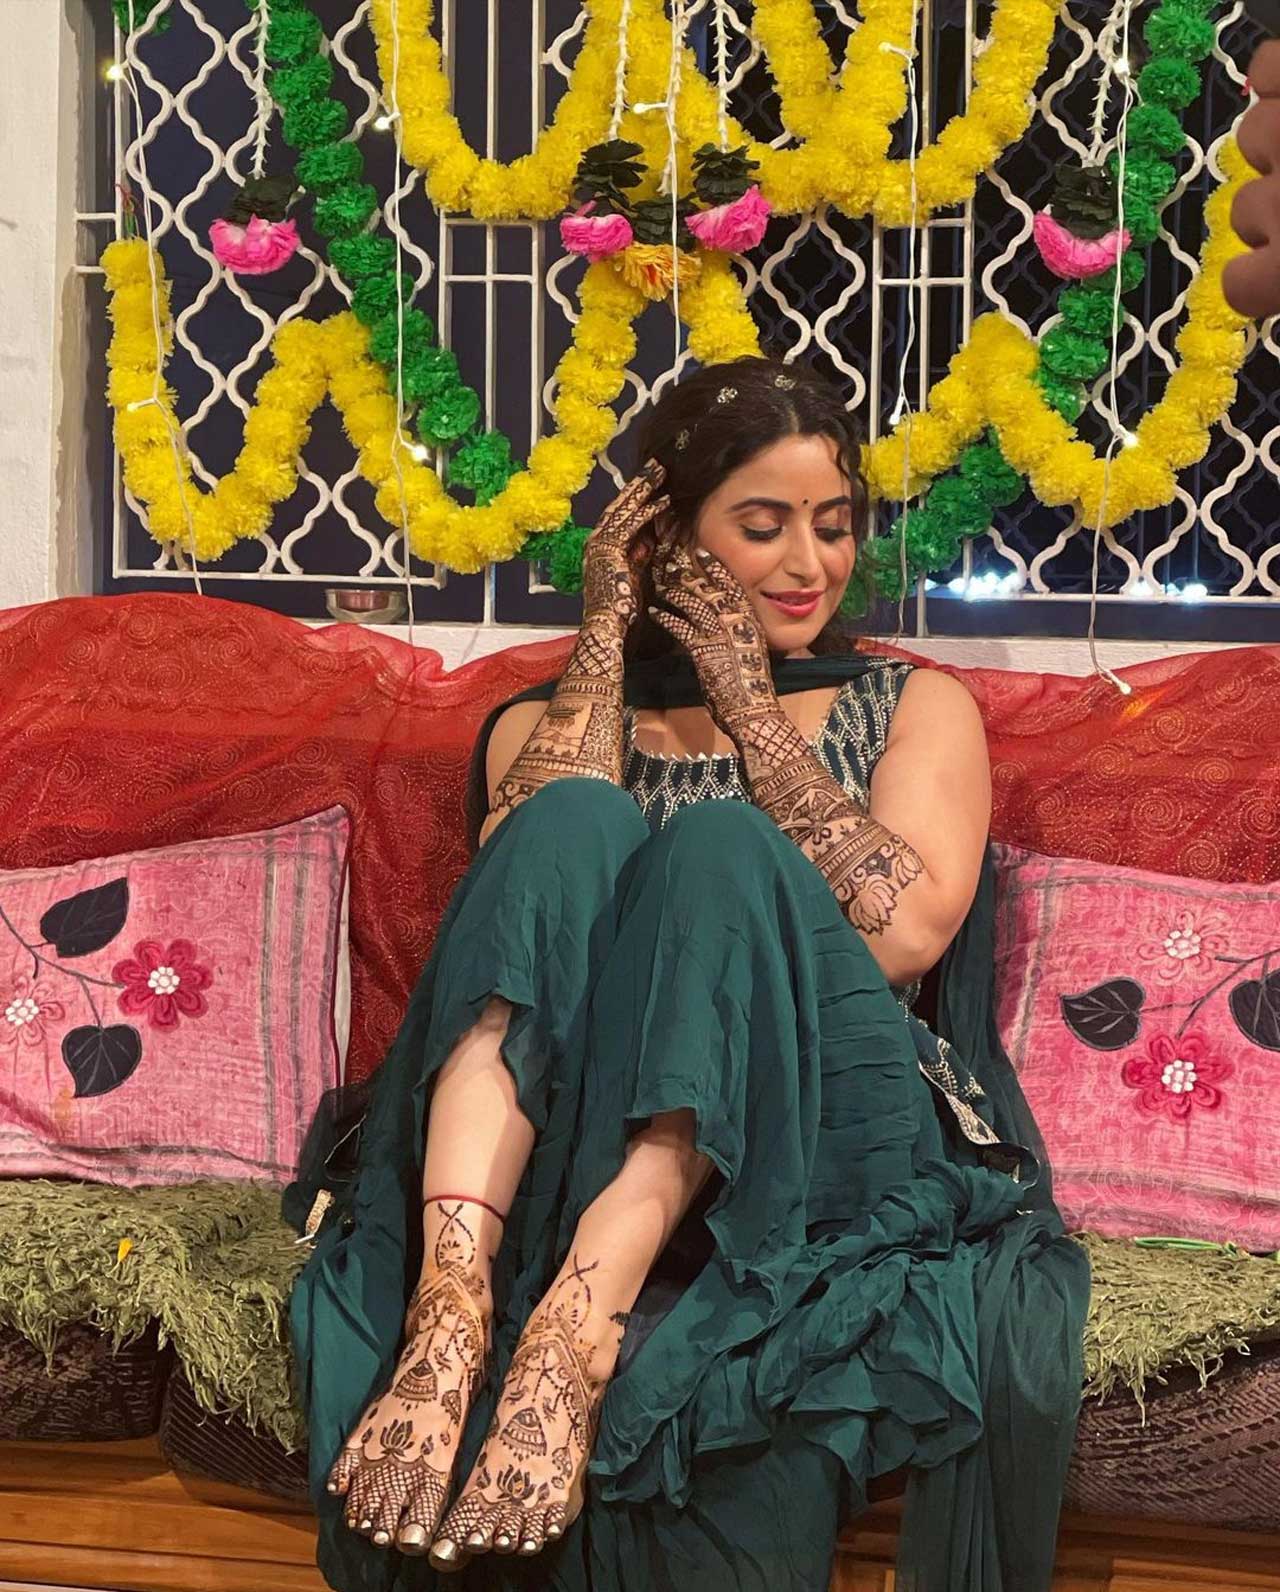 Aishwarya Sharma decked up in green and posed for pictures with her family. Her mehendi had intricate detail and she looked resplendent in the pictures.